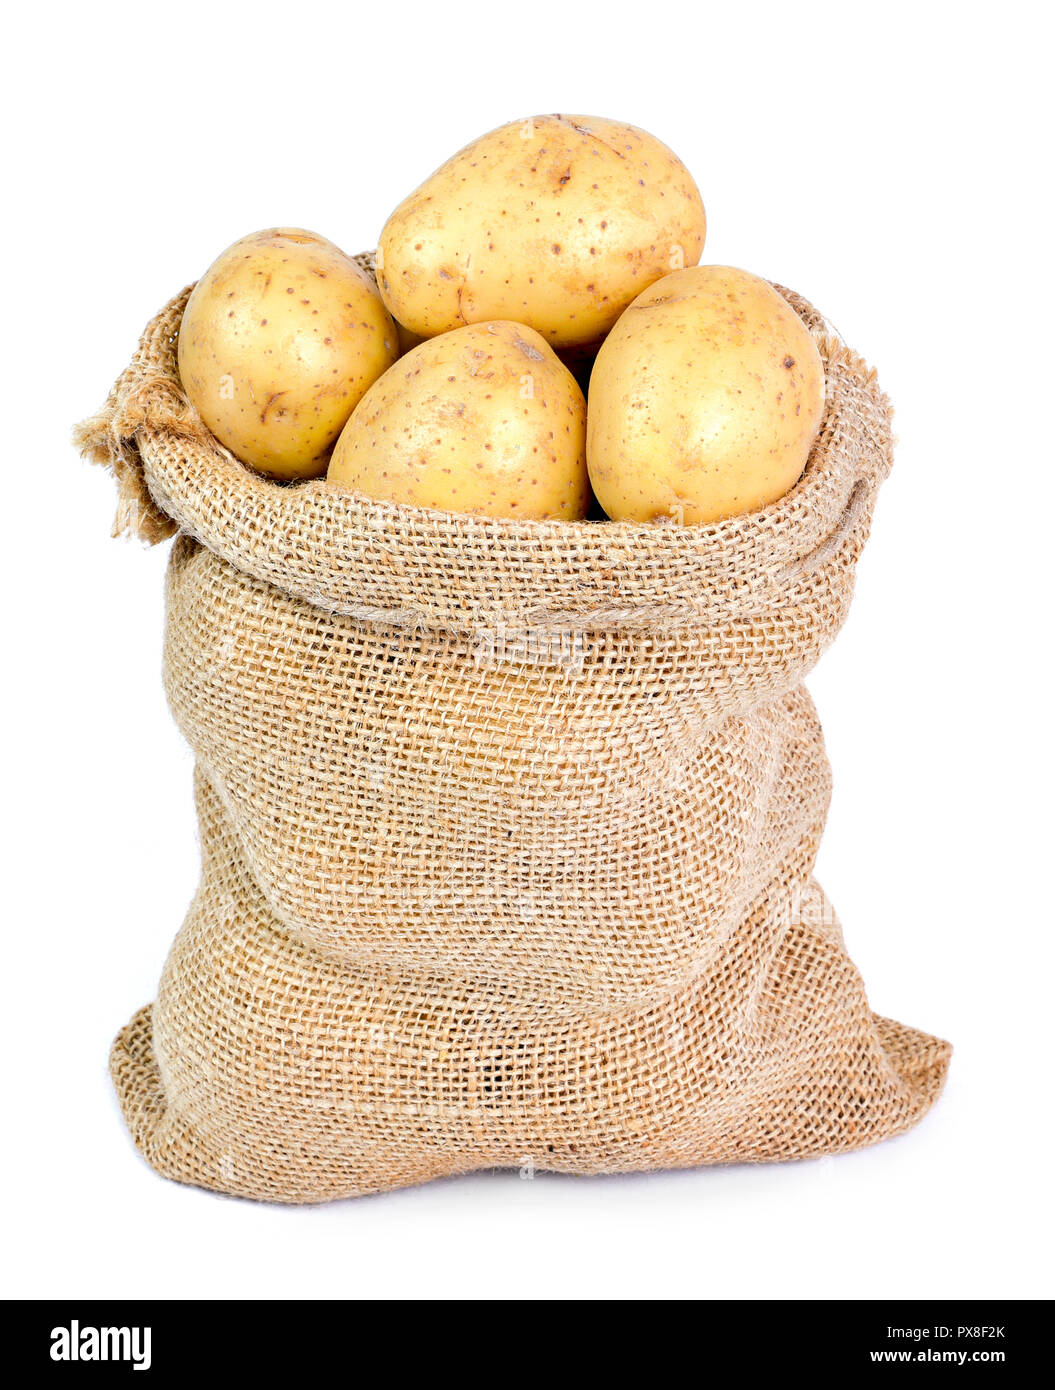 Fresh raw potatoes in a burlap sack. Earthy potato scene with Sackcloth isolated on white background, cooking ingredient. Stock Photo